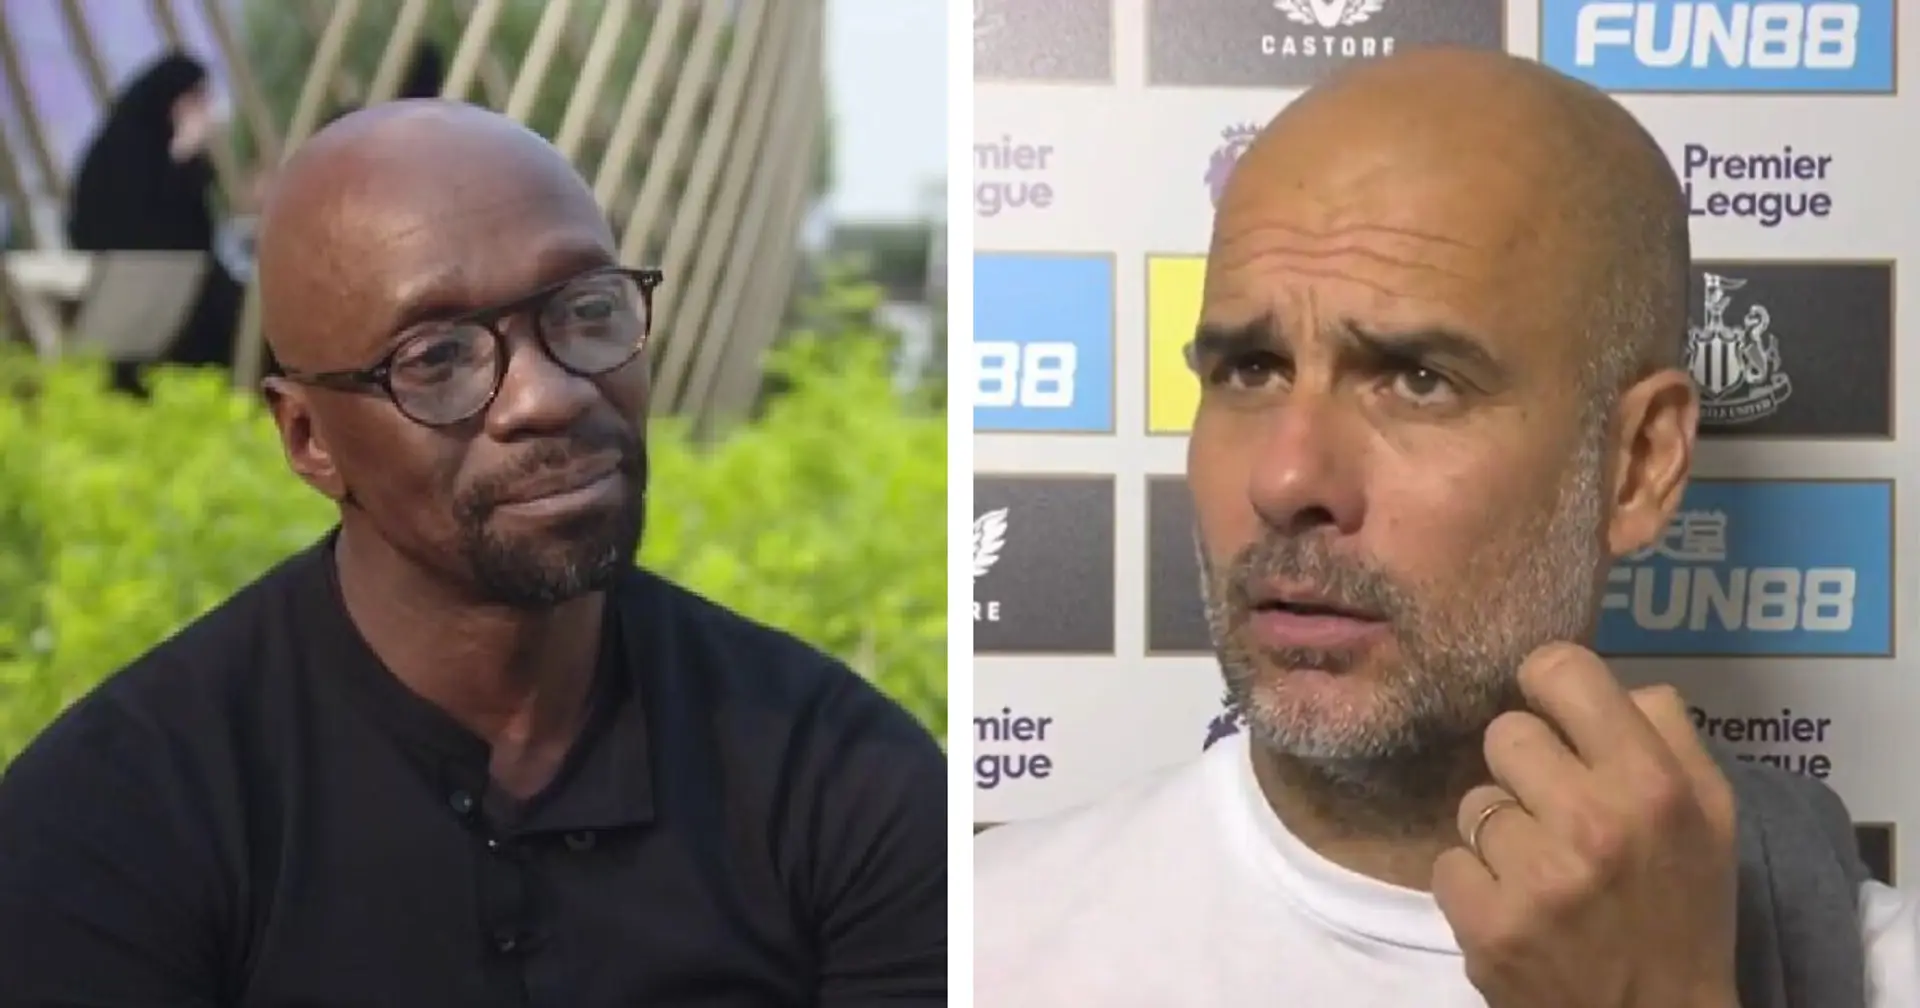 Makelele claims even Guardiola and Mourinho would struggle to succeed at Chelsea